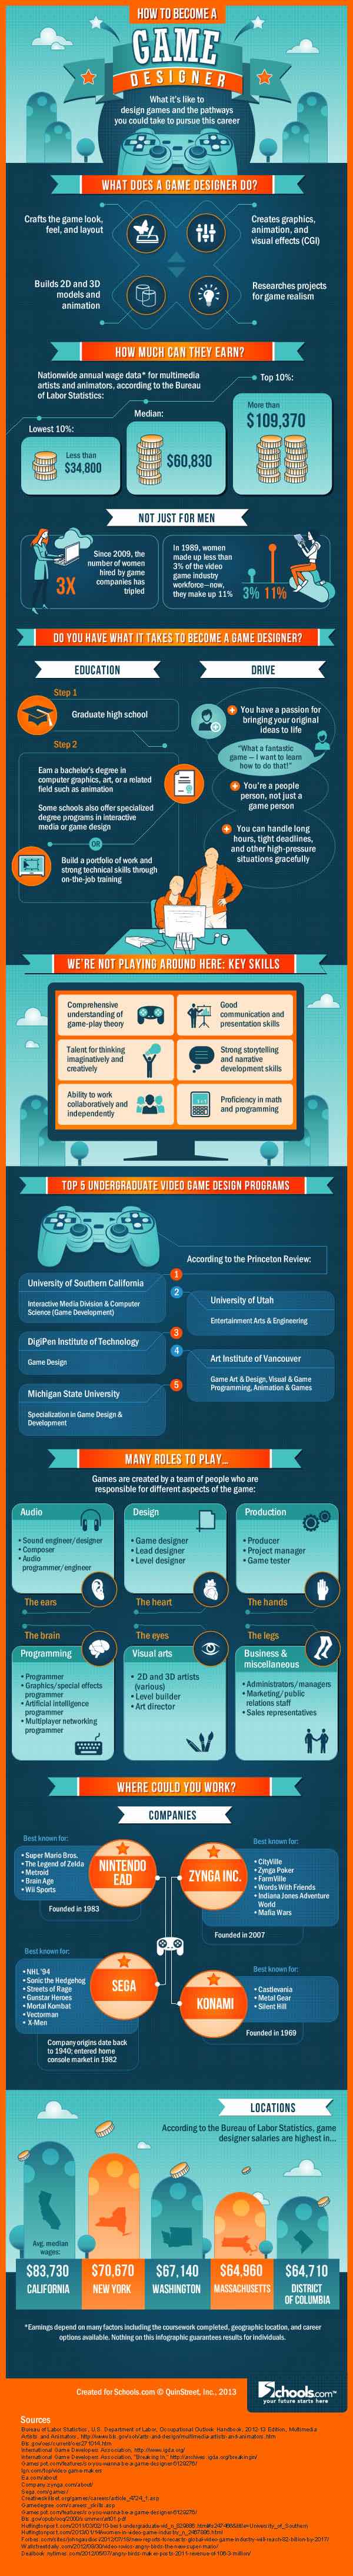 How To Become Game Developer And Designer, Earn Millions (2)